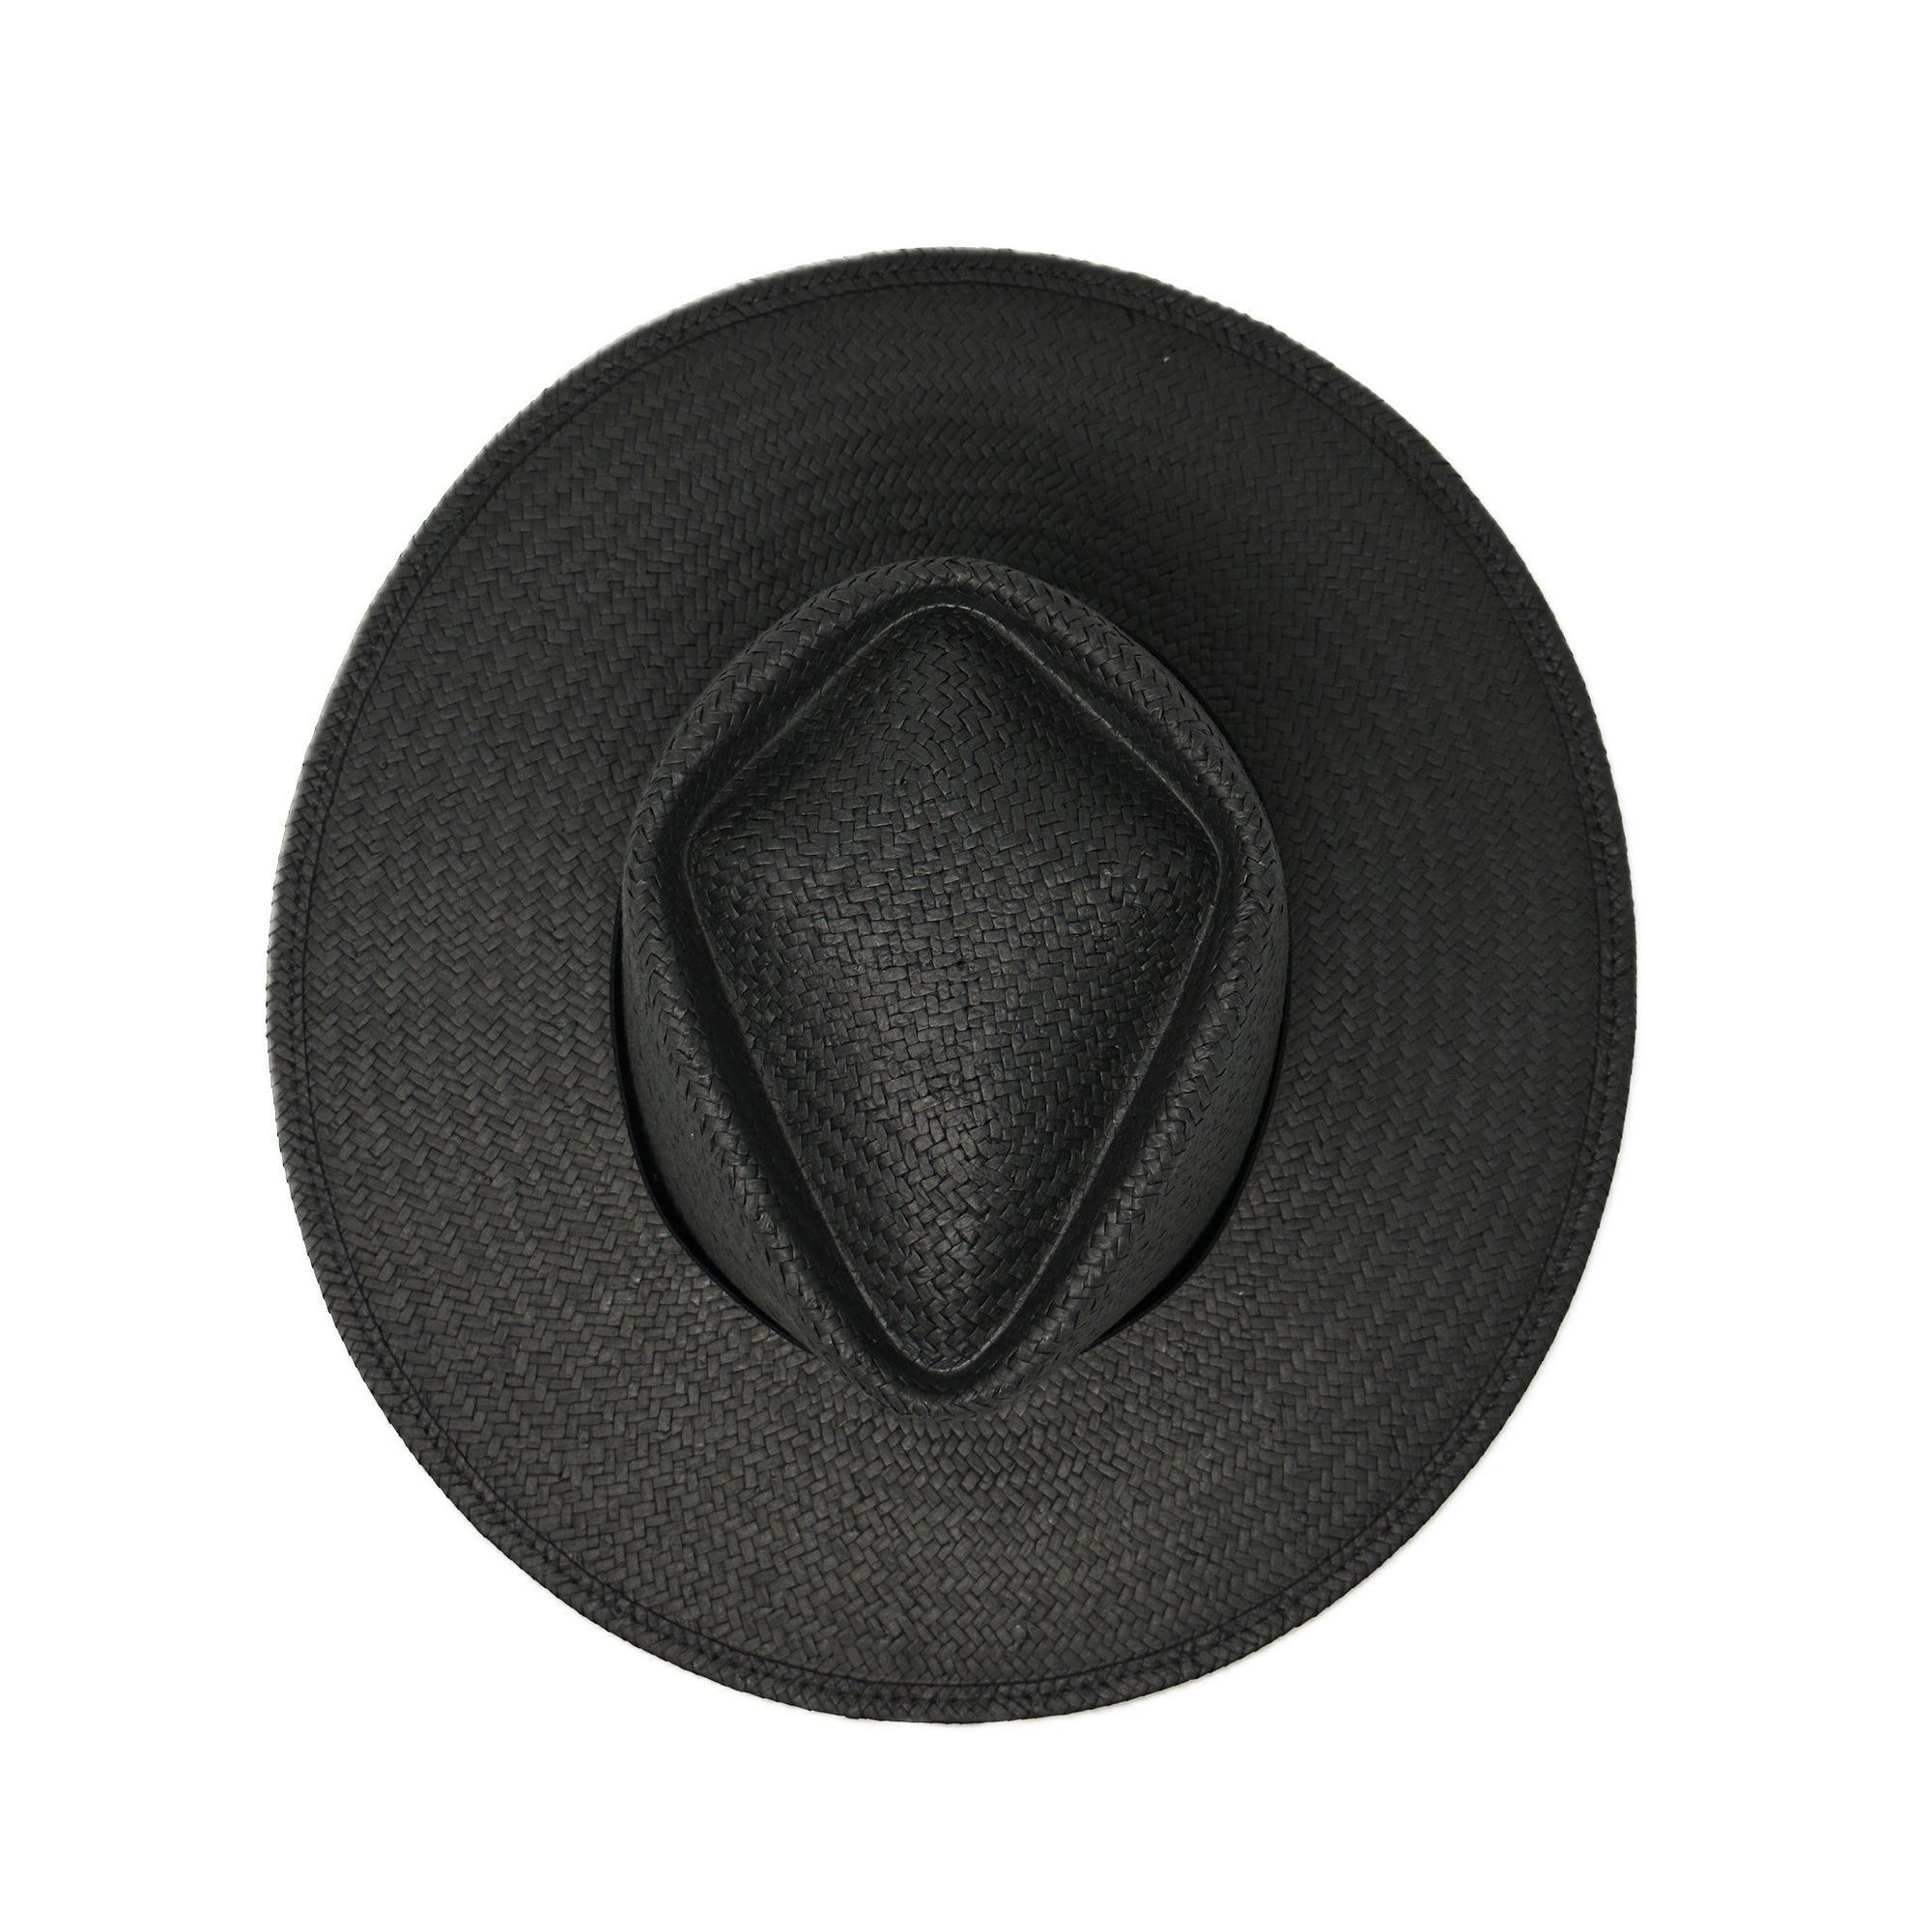 SAN PANCHO PACKABLE STRAW BLACK